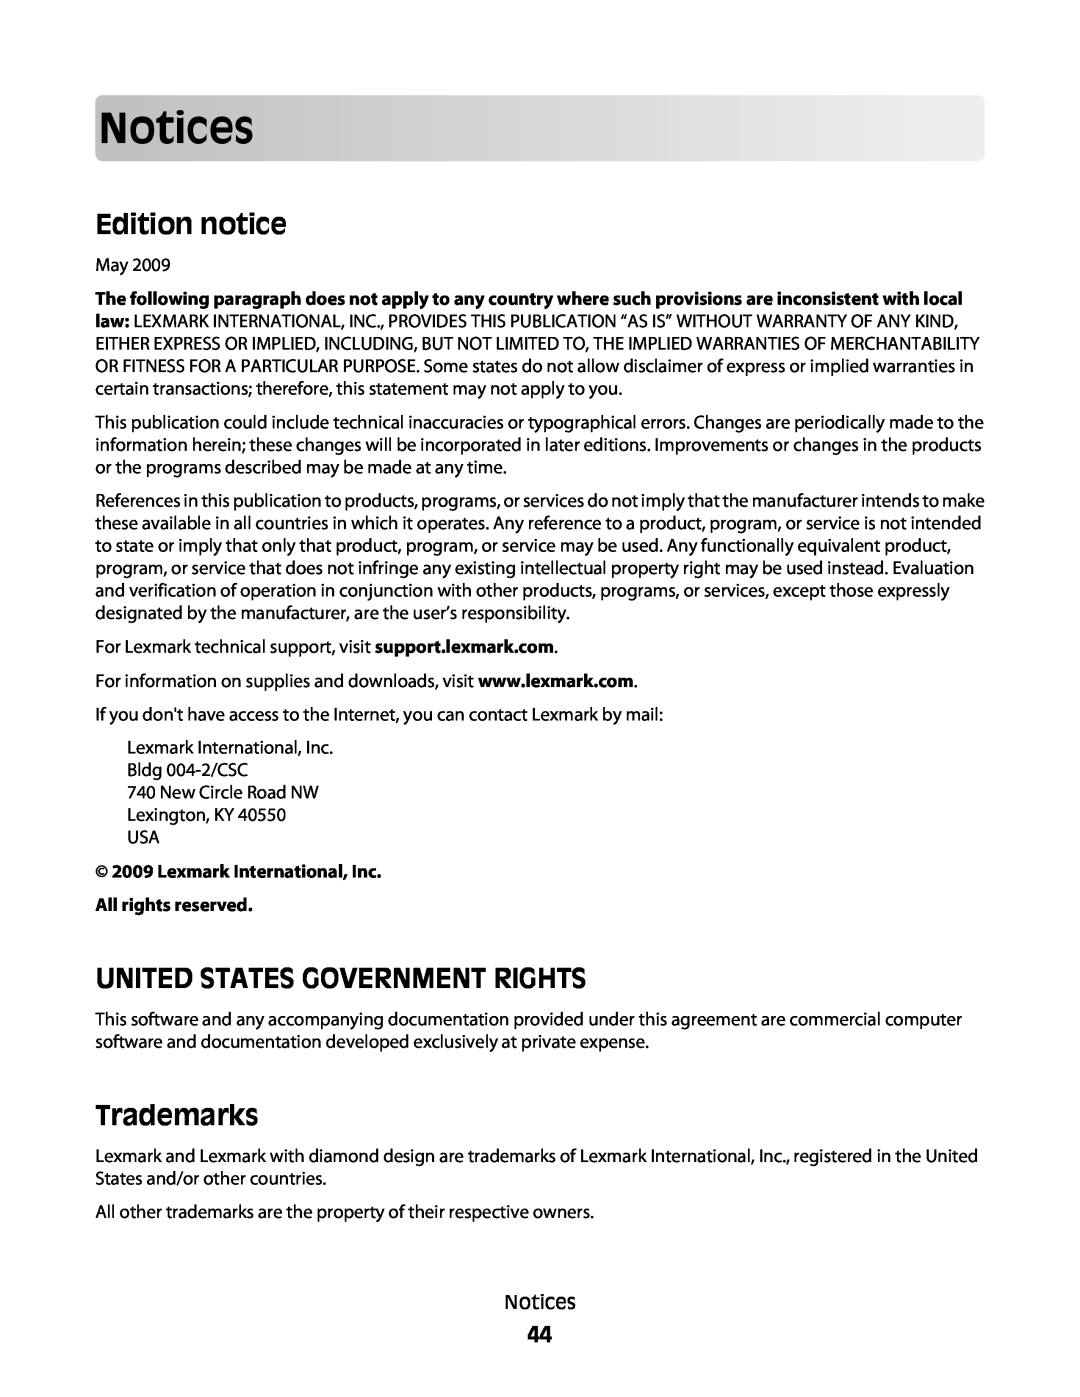 Lexmark S600 manual Notices, Edition notice, United States Government Rights, Trademarks 